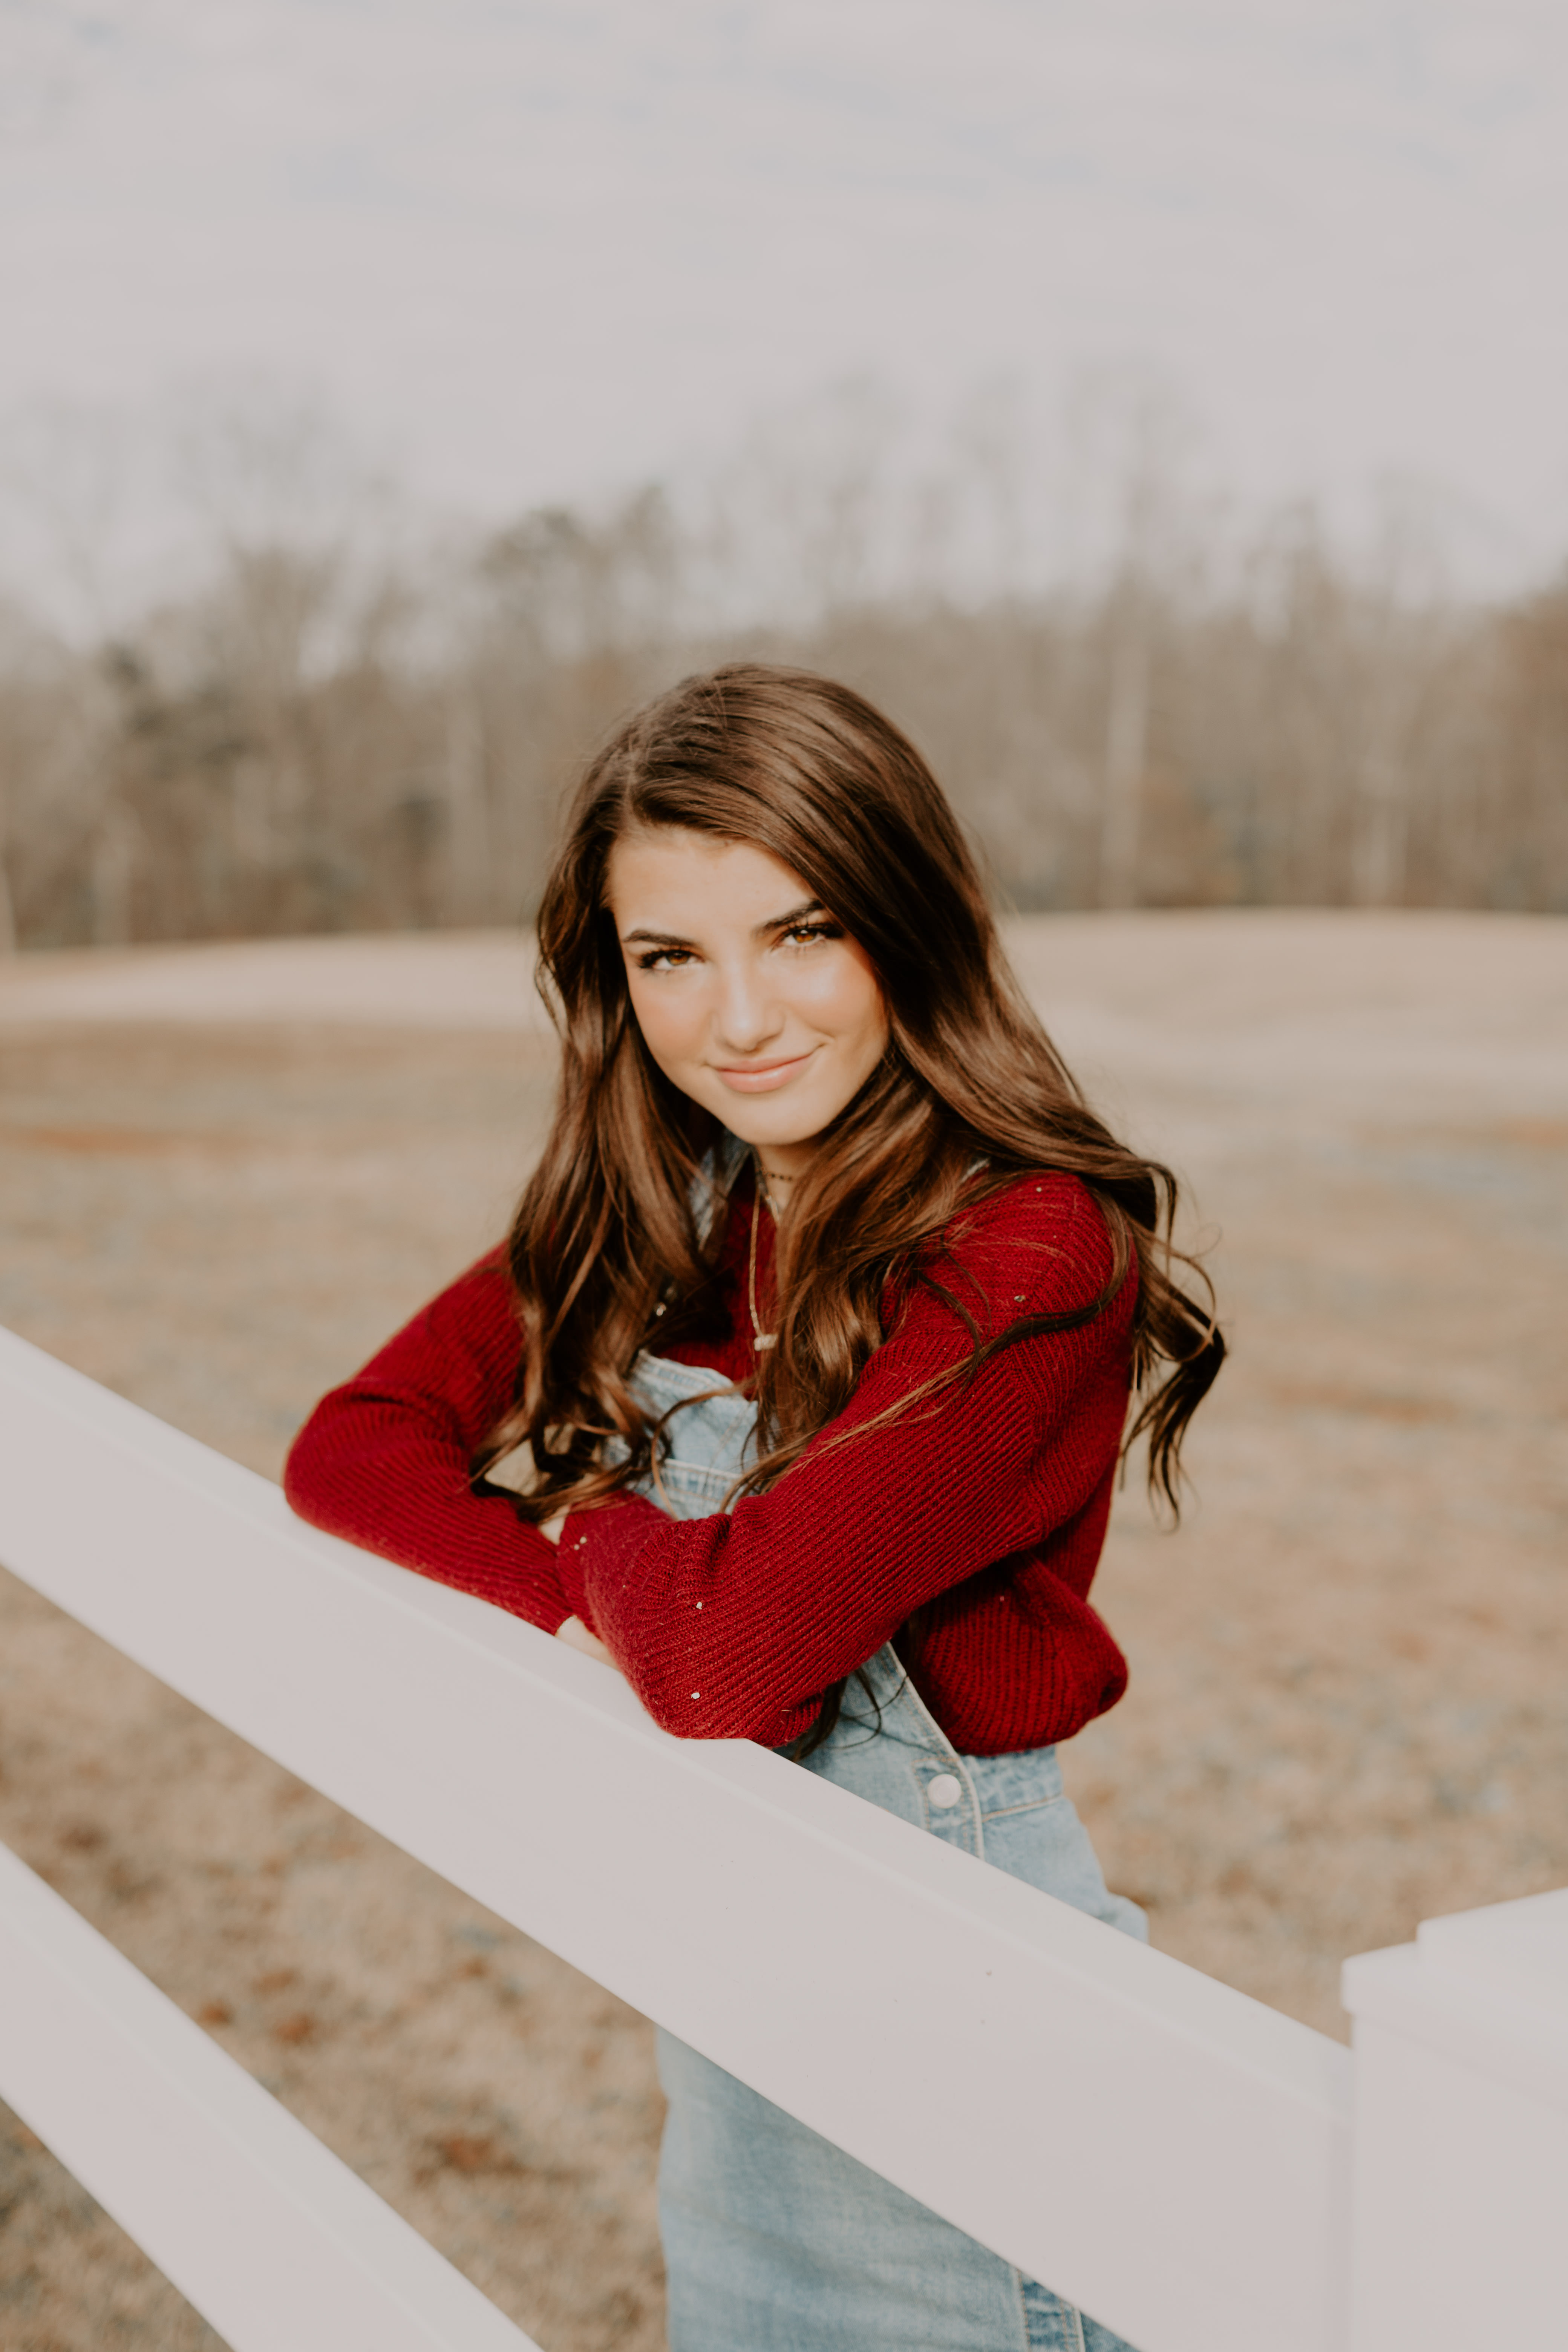 Meghan H. fence red longsleeve overalls open field pose inspiration model senior pictures Atlanta photographer smiling white house leaning Olie West bench